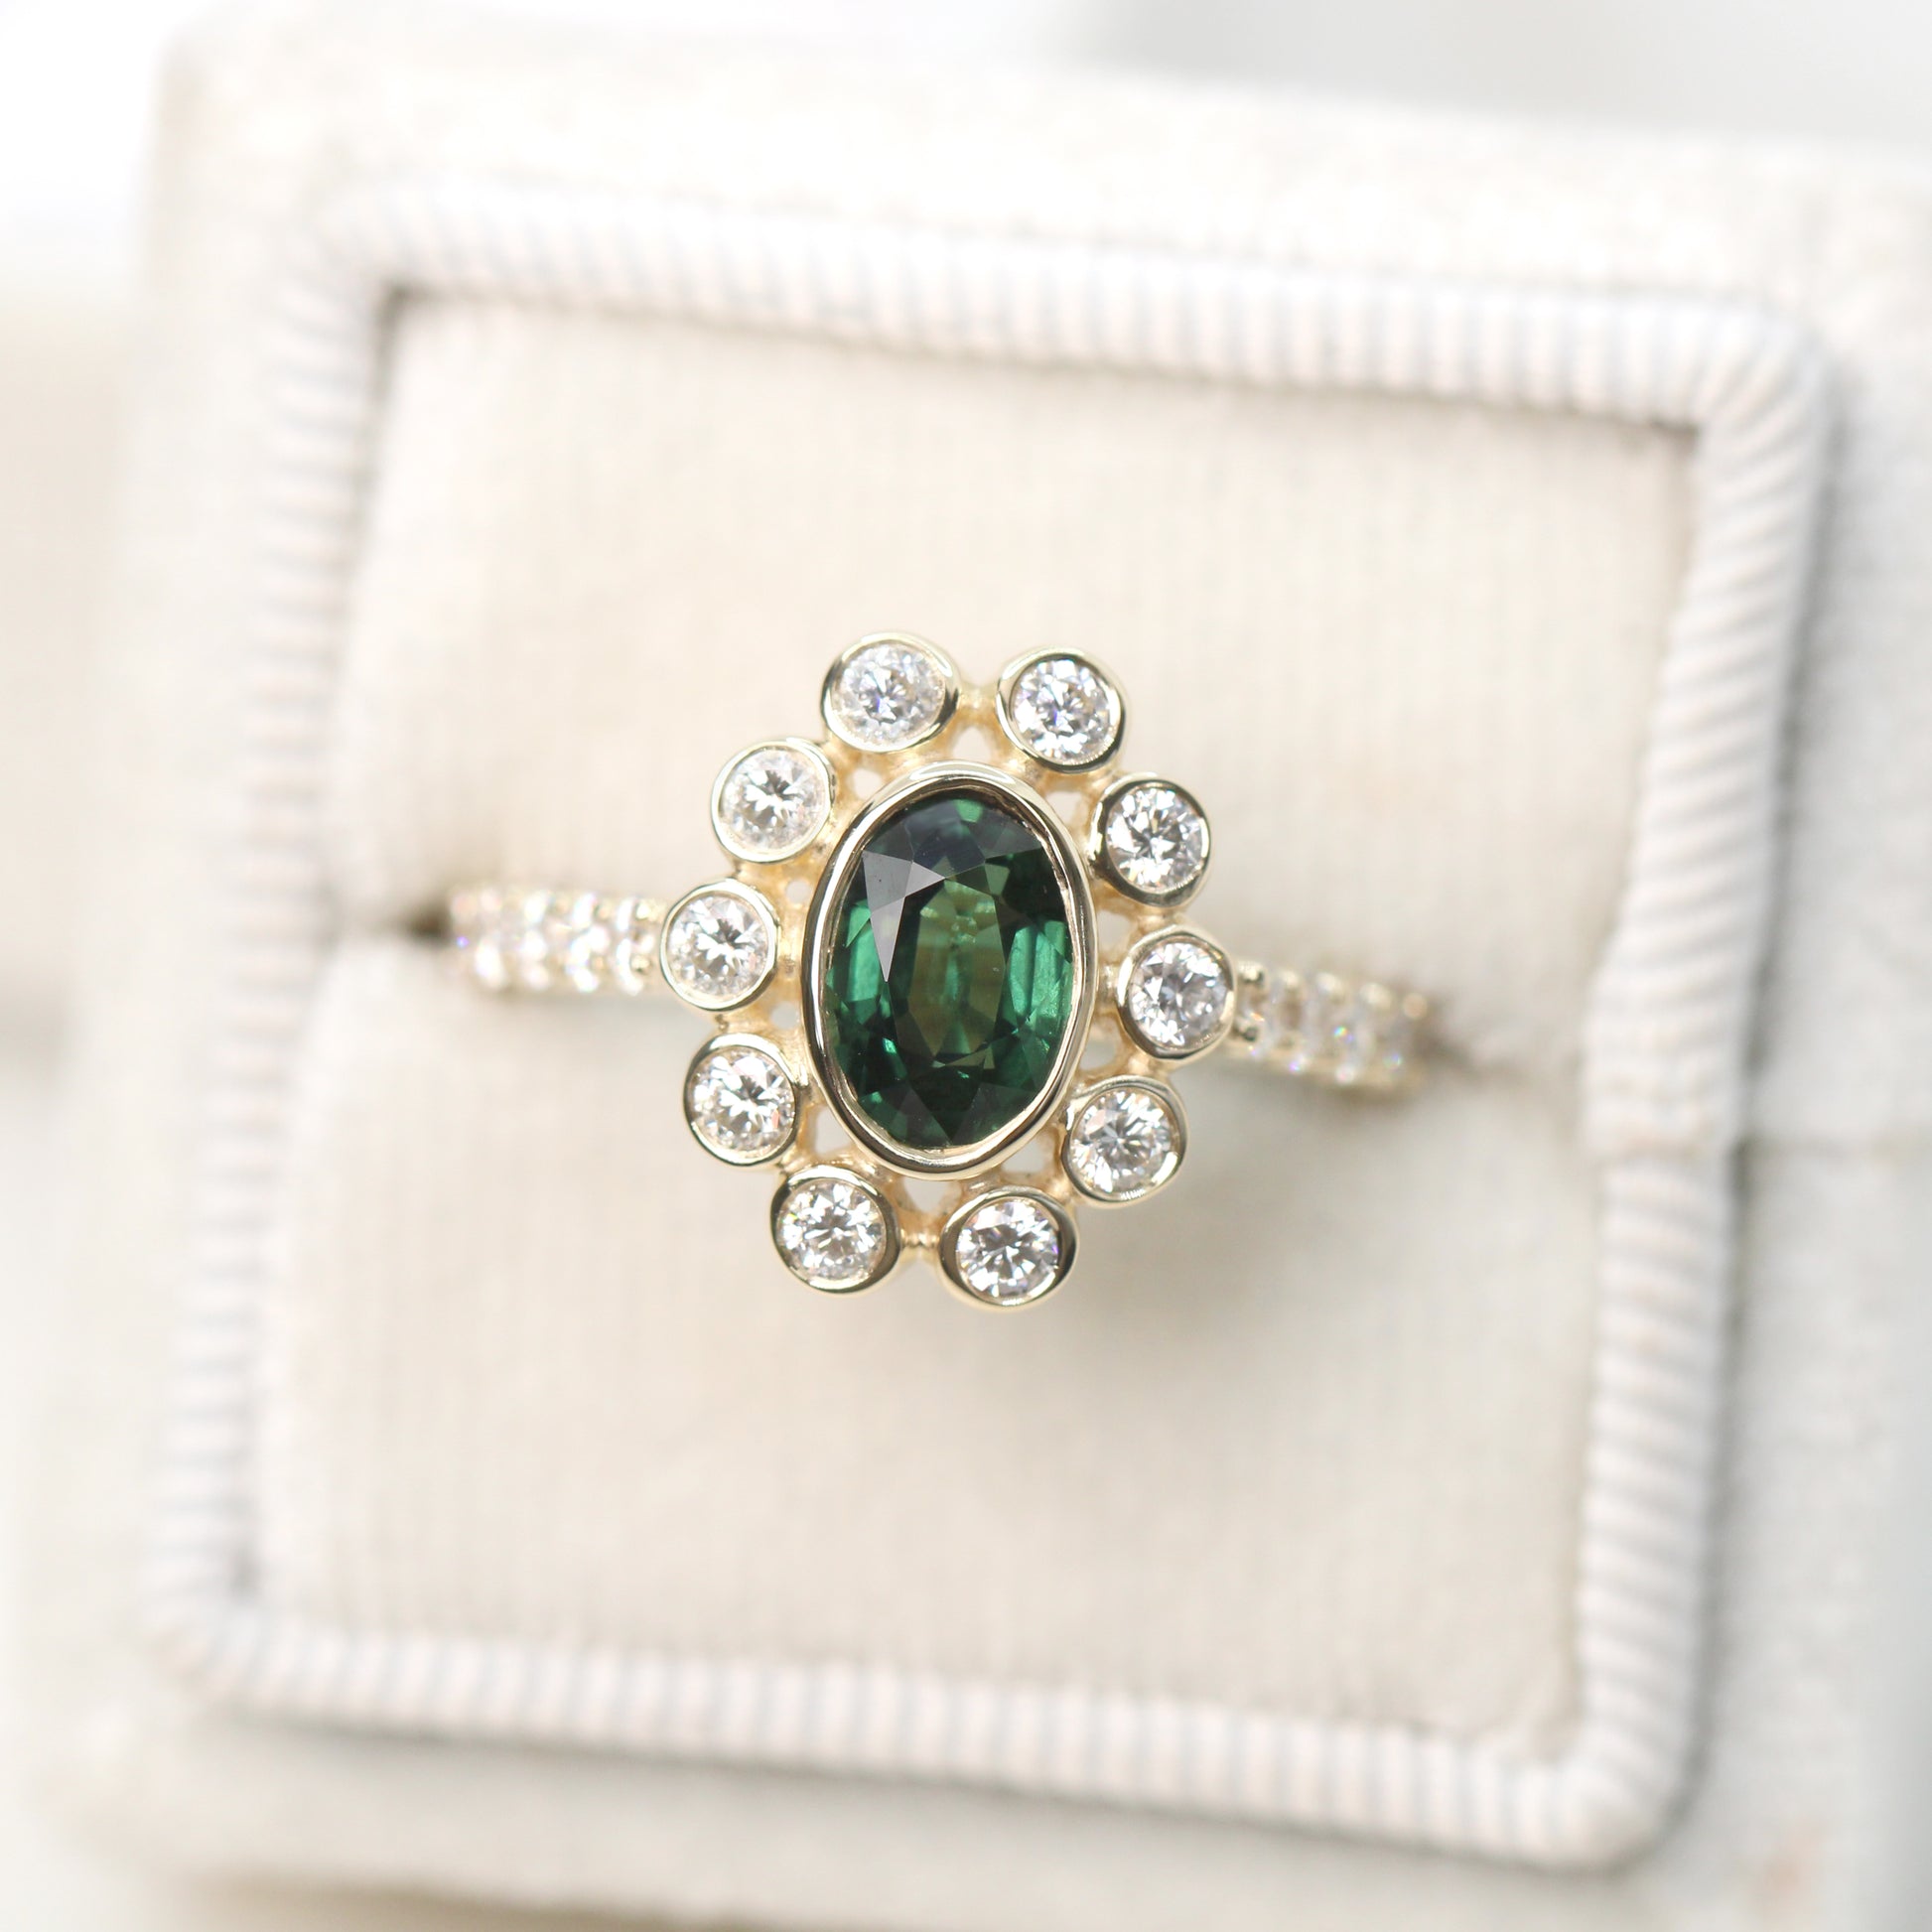 Minnie Ring with a 1.14 Carat Green Oval Australian Sapphire and White Accent Diamonds in 14k Yellow Gold - Ready to Size and Ship - Midwinter Co. Alternative Bridal Rings and Modern Fine Jewelry